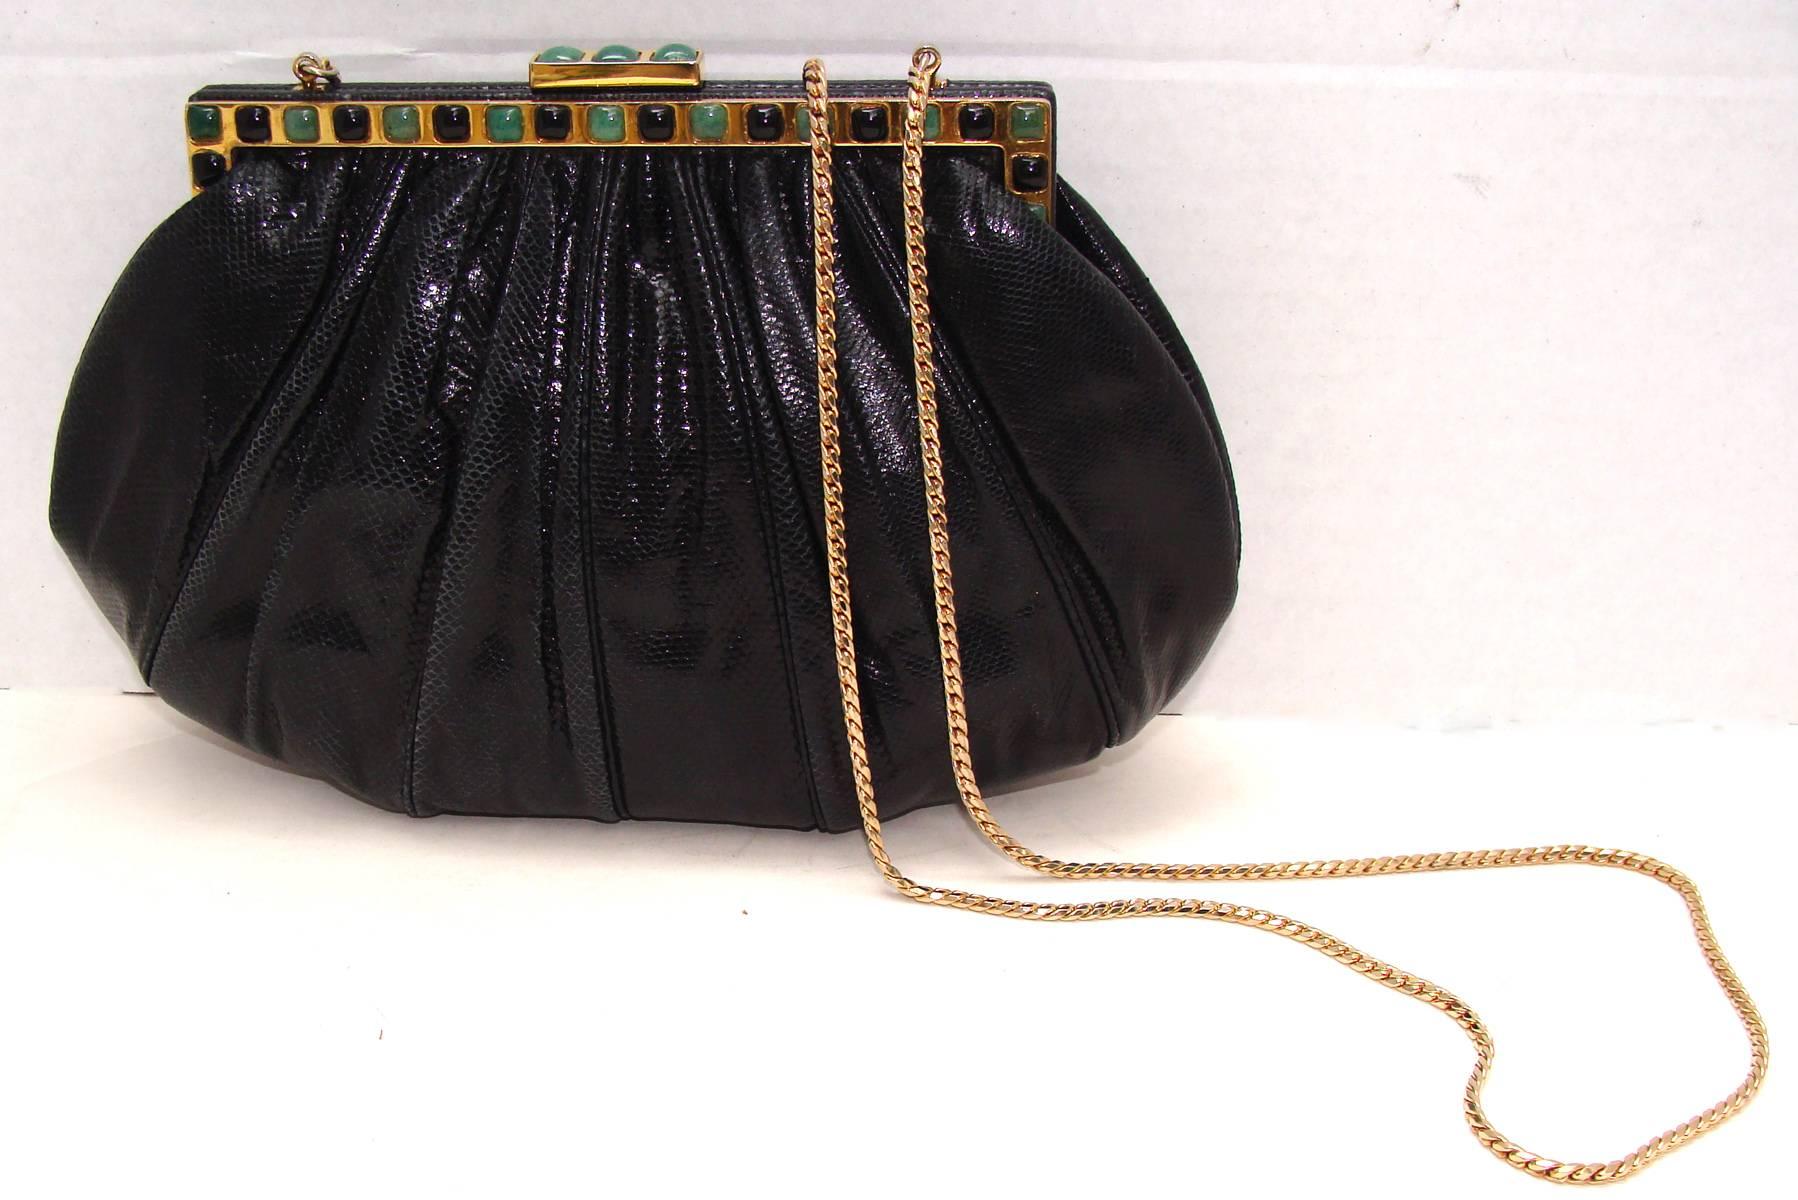 Women's or Men's Black Karung Evening Bag by Judith Leiber HOLIDAY